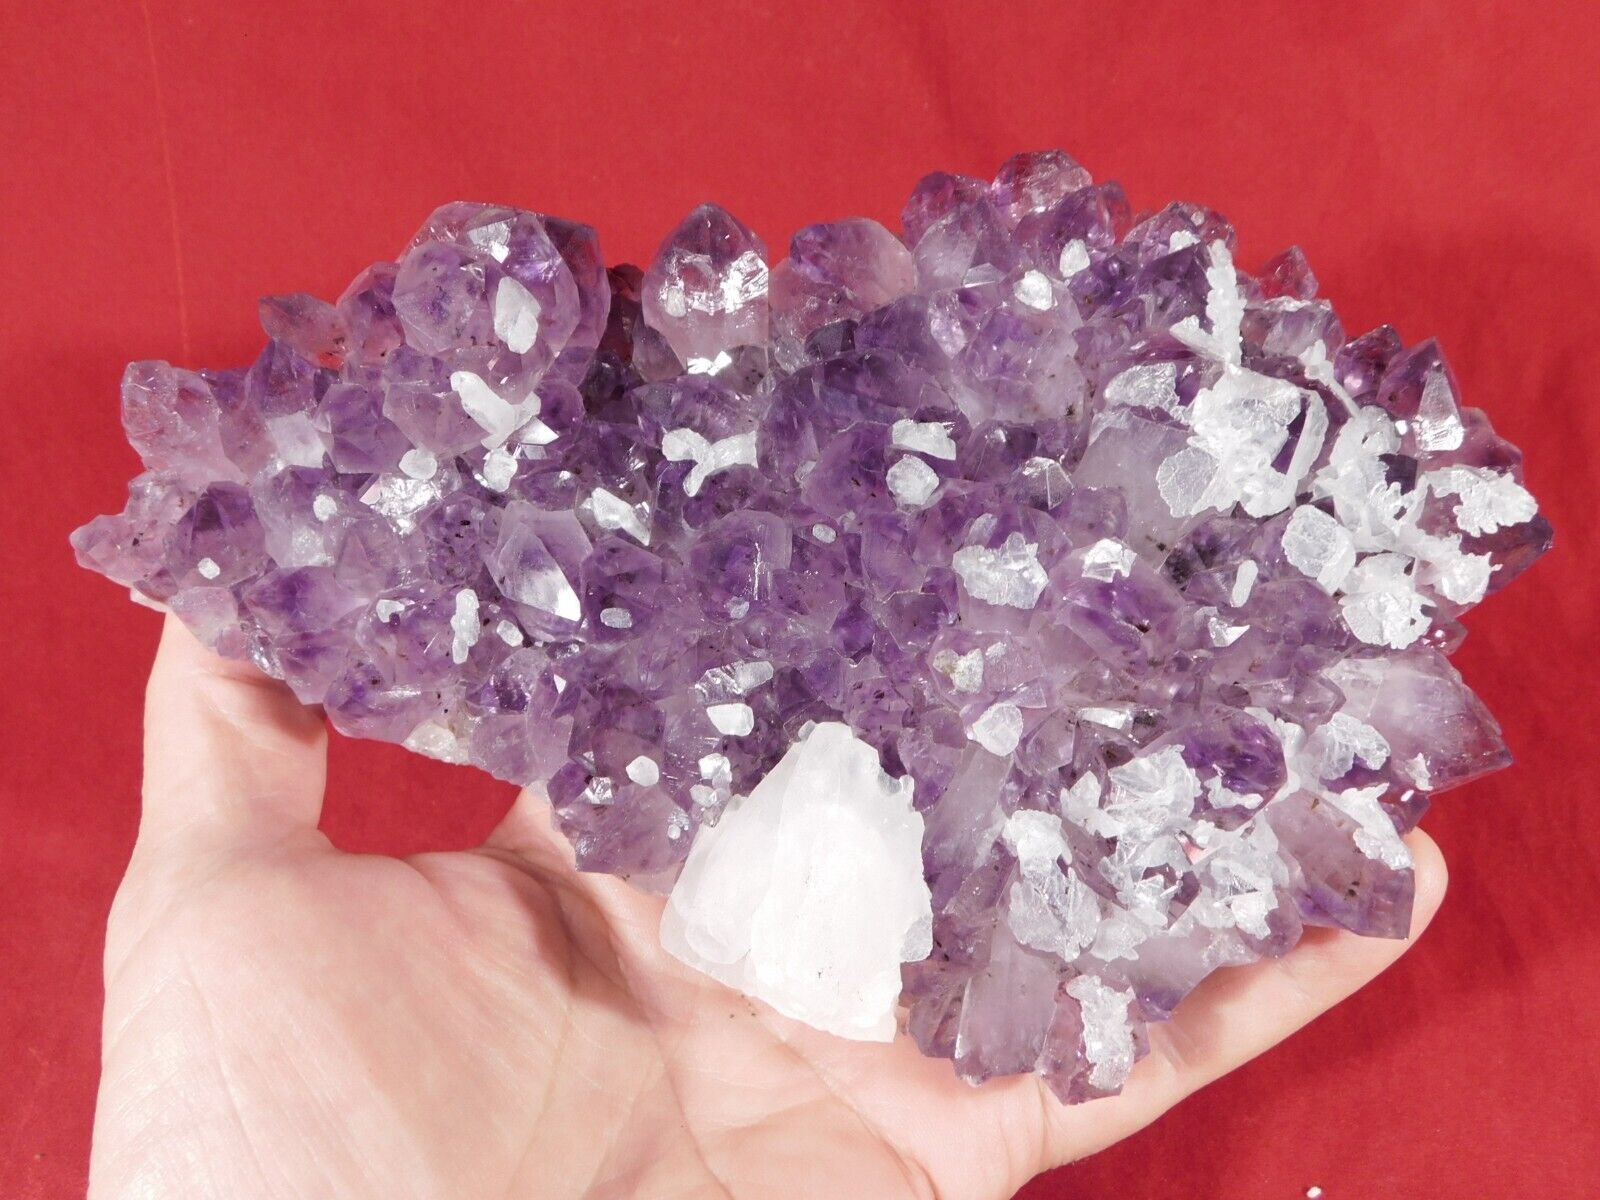 Big AMETHYST Crystal Cluster With Contrasting Calcite Crystals Brazil 891gr